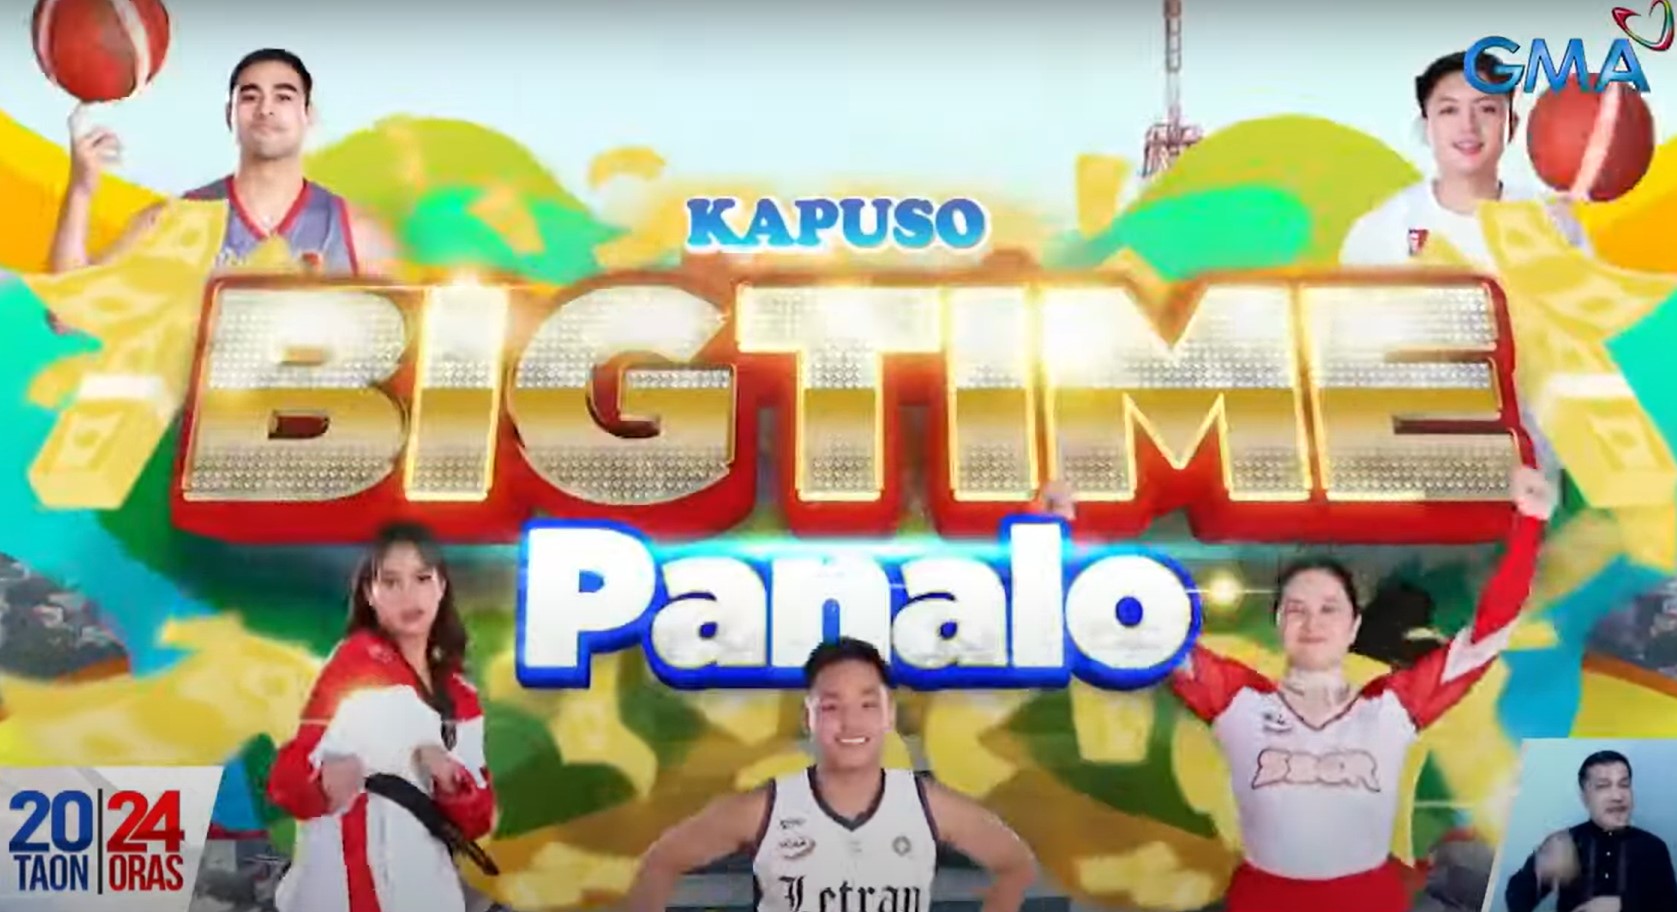 Over P8 million worth of prizes up for grabs in Kapuso Bigtime Panalo